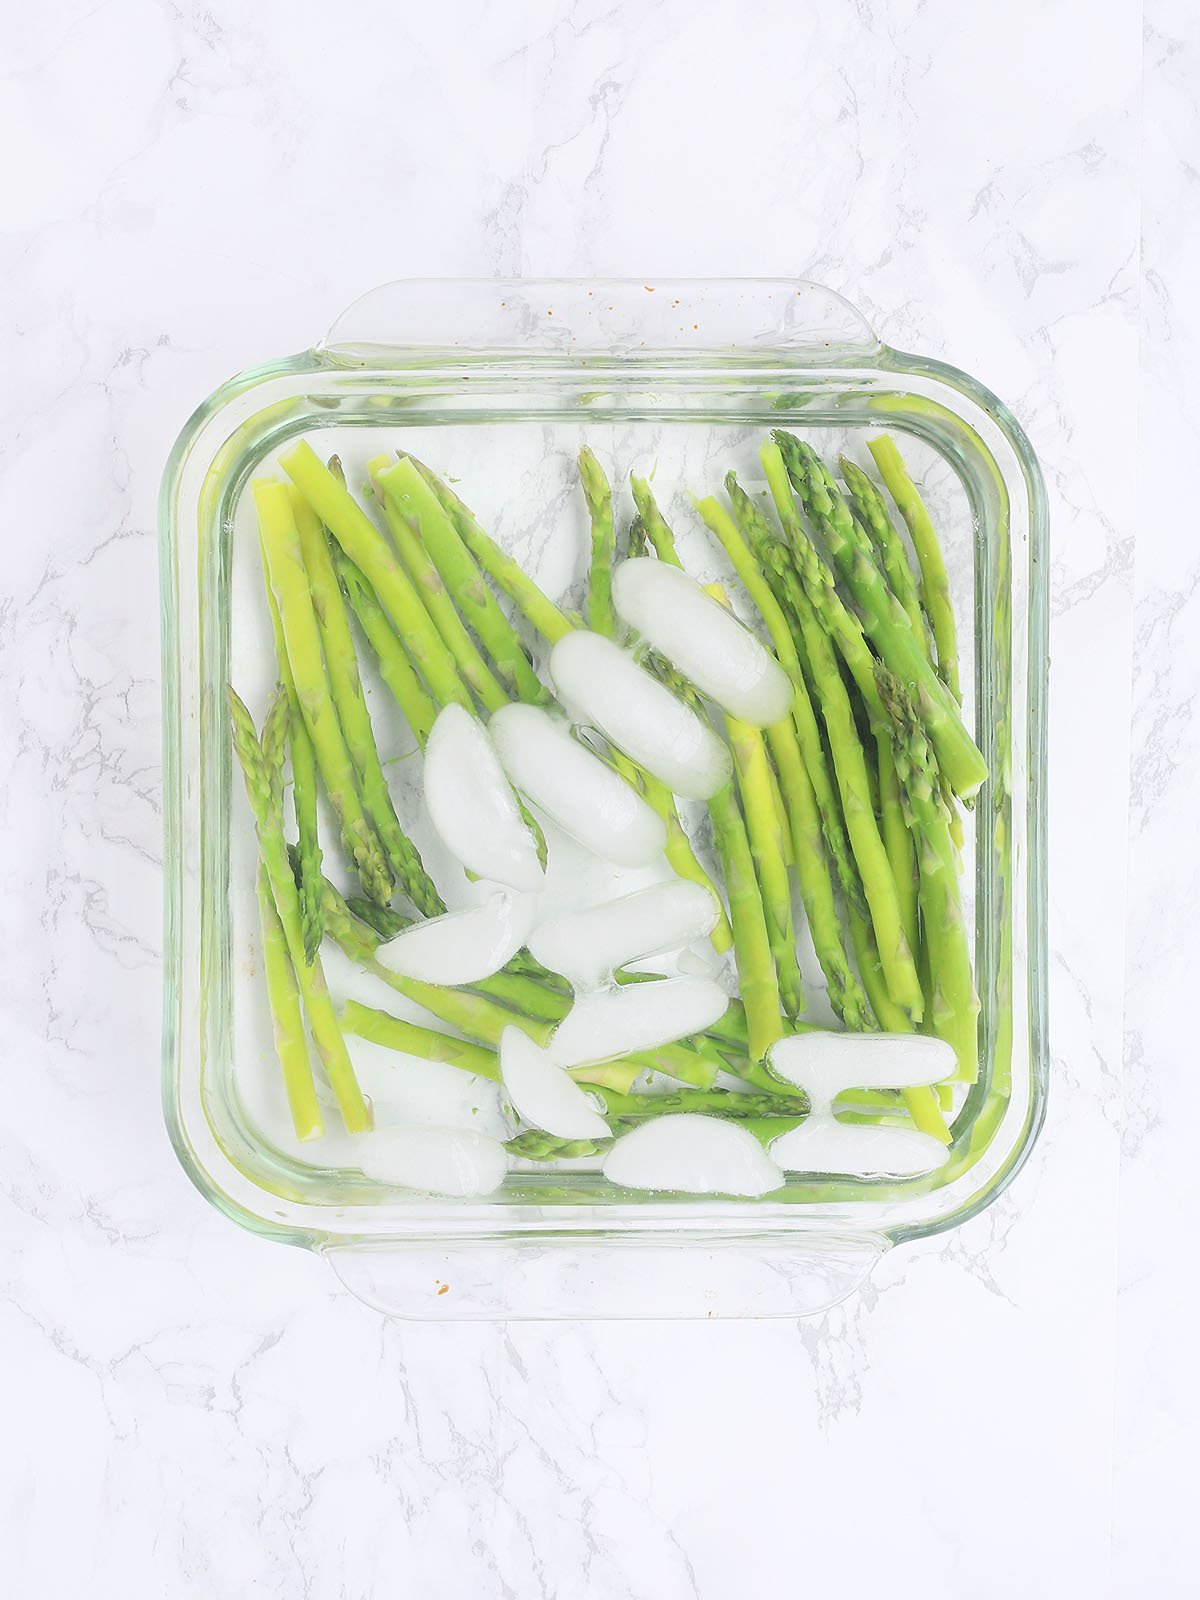 asparagus in a bowl of ice water